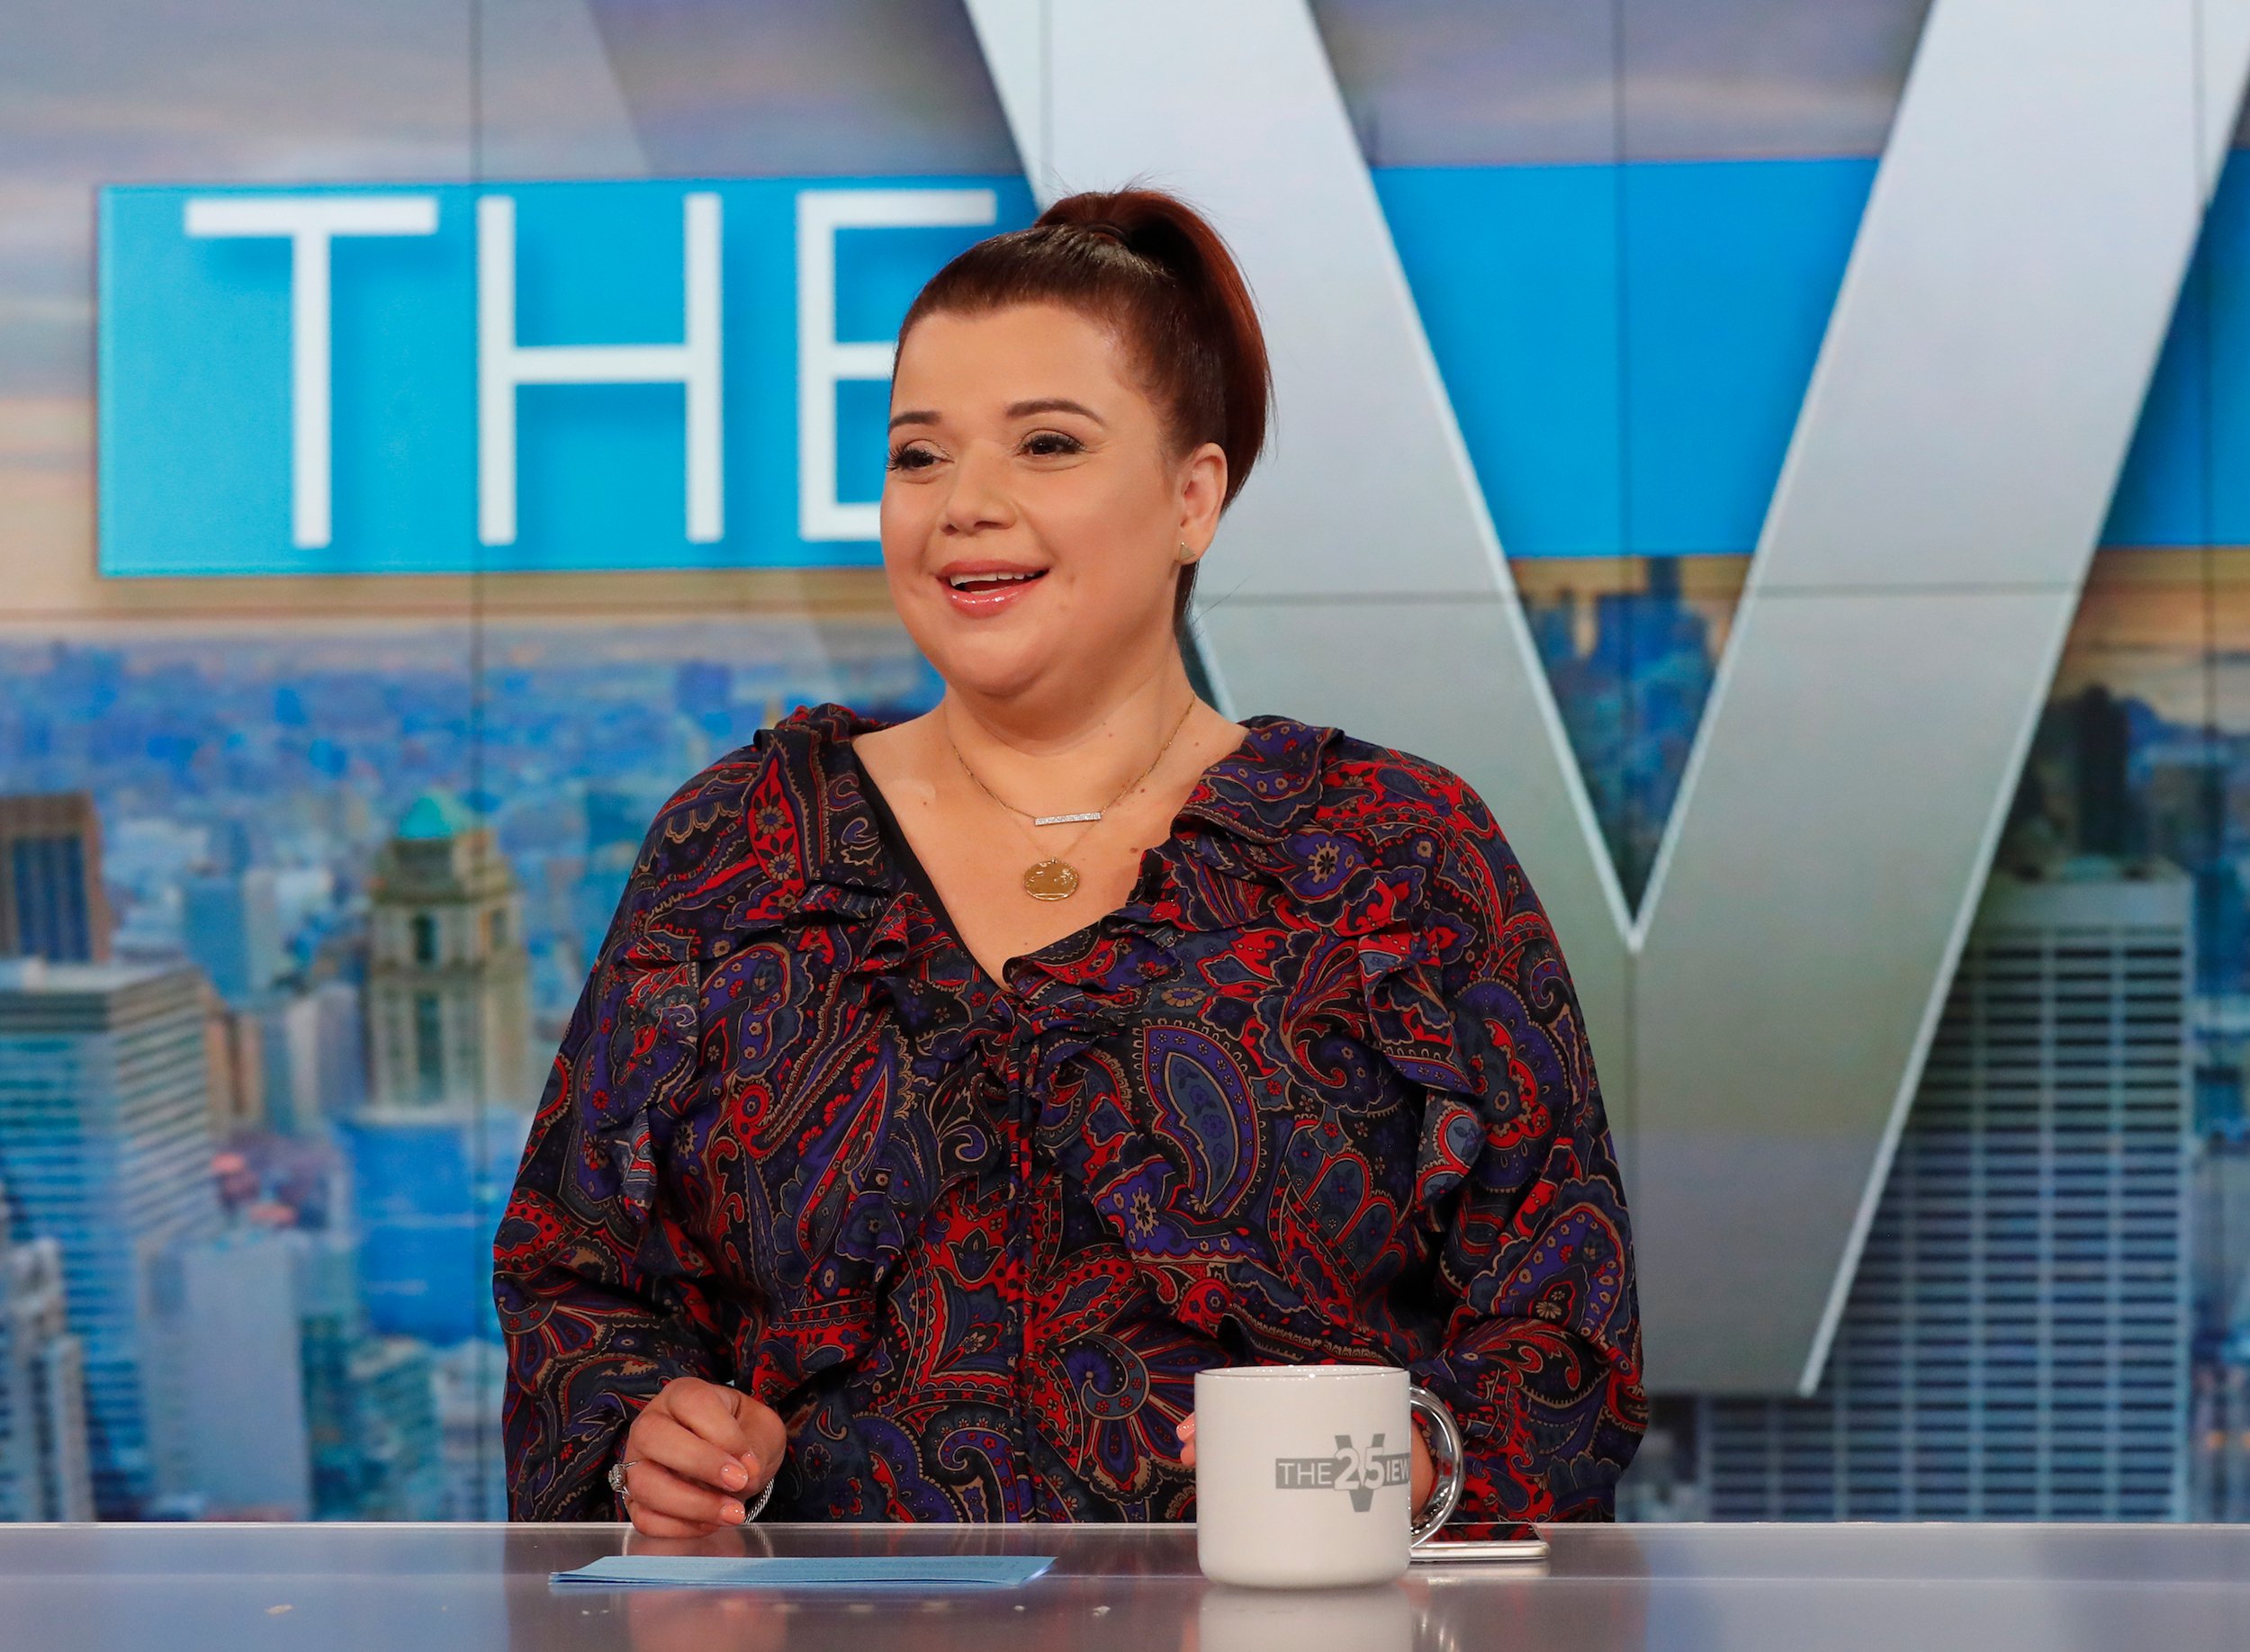 ‘The View’ Co-Host Ana Navarro Celebrates Eva Longoria And Fans Shower The Stars With Compliments